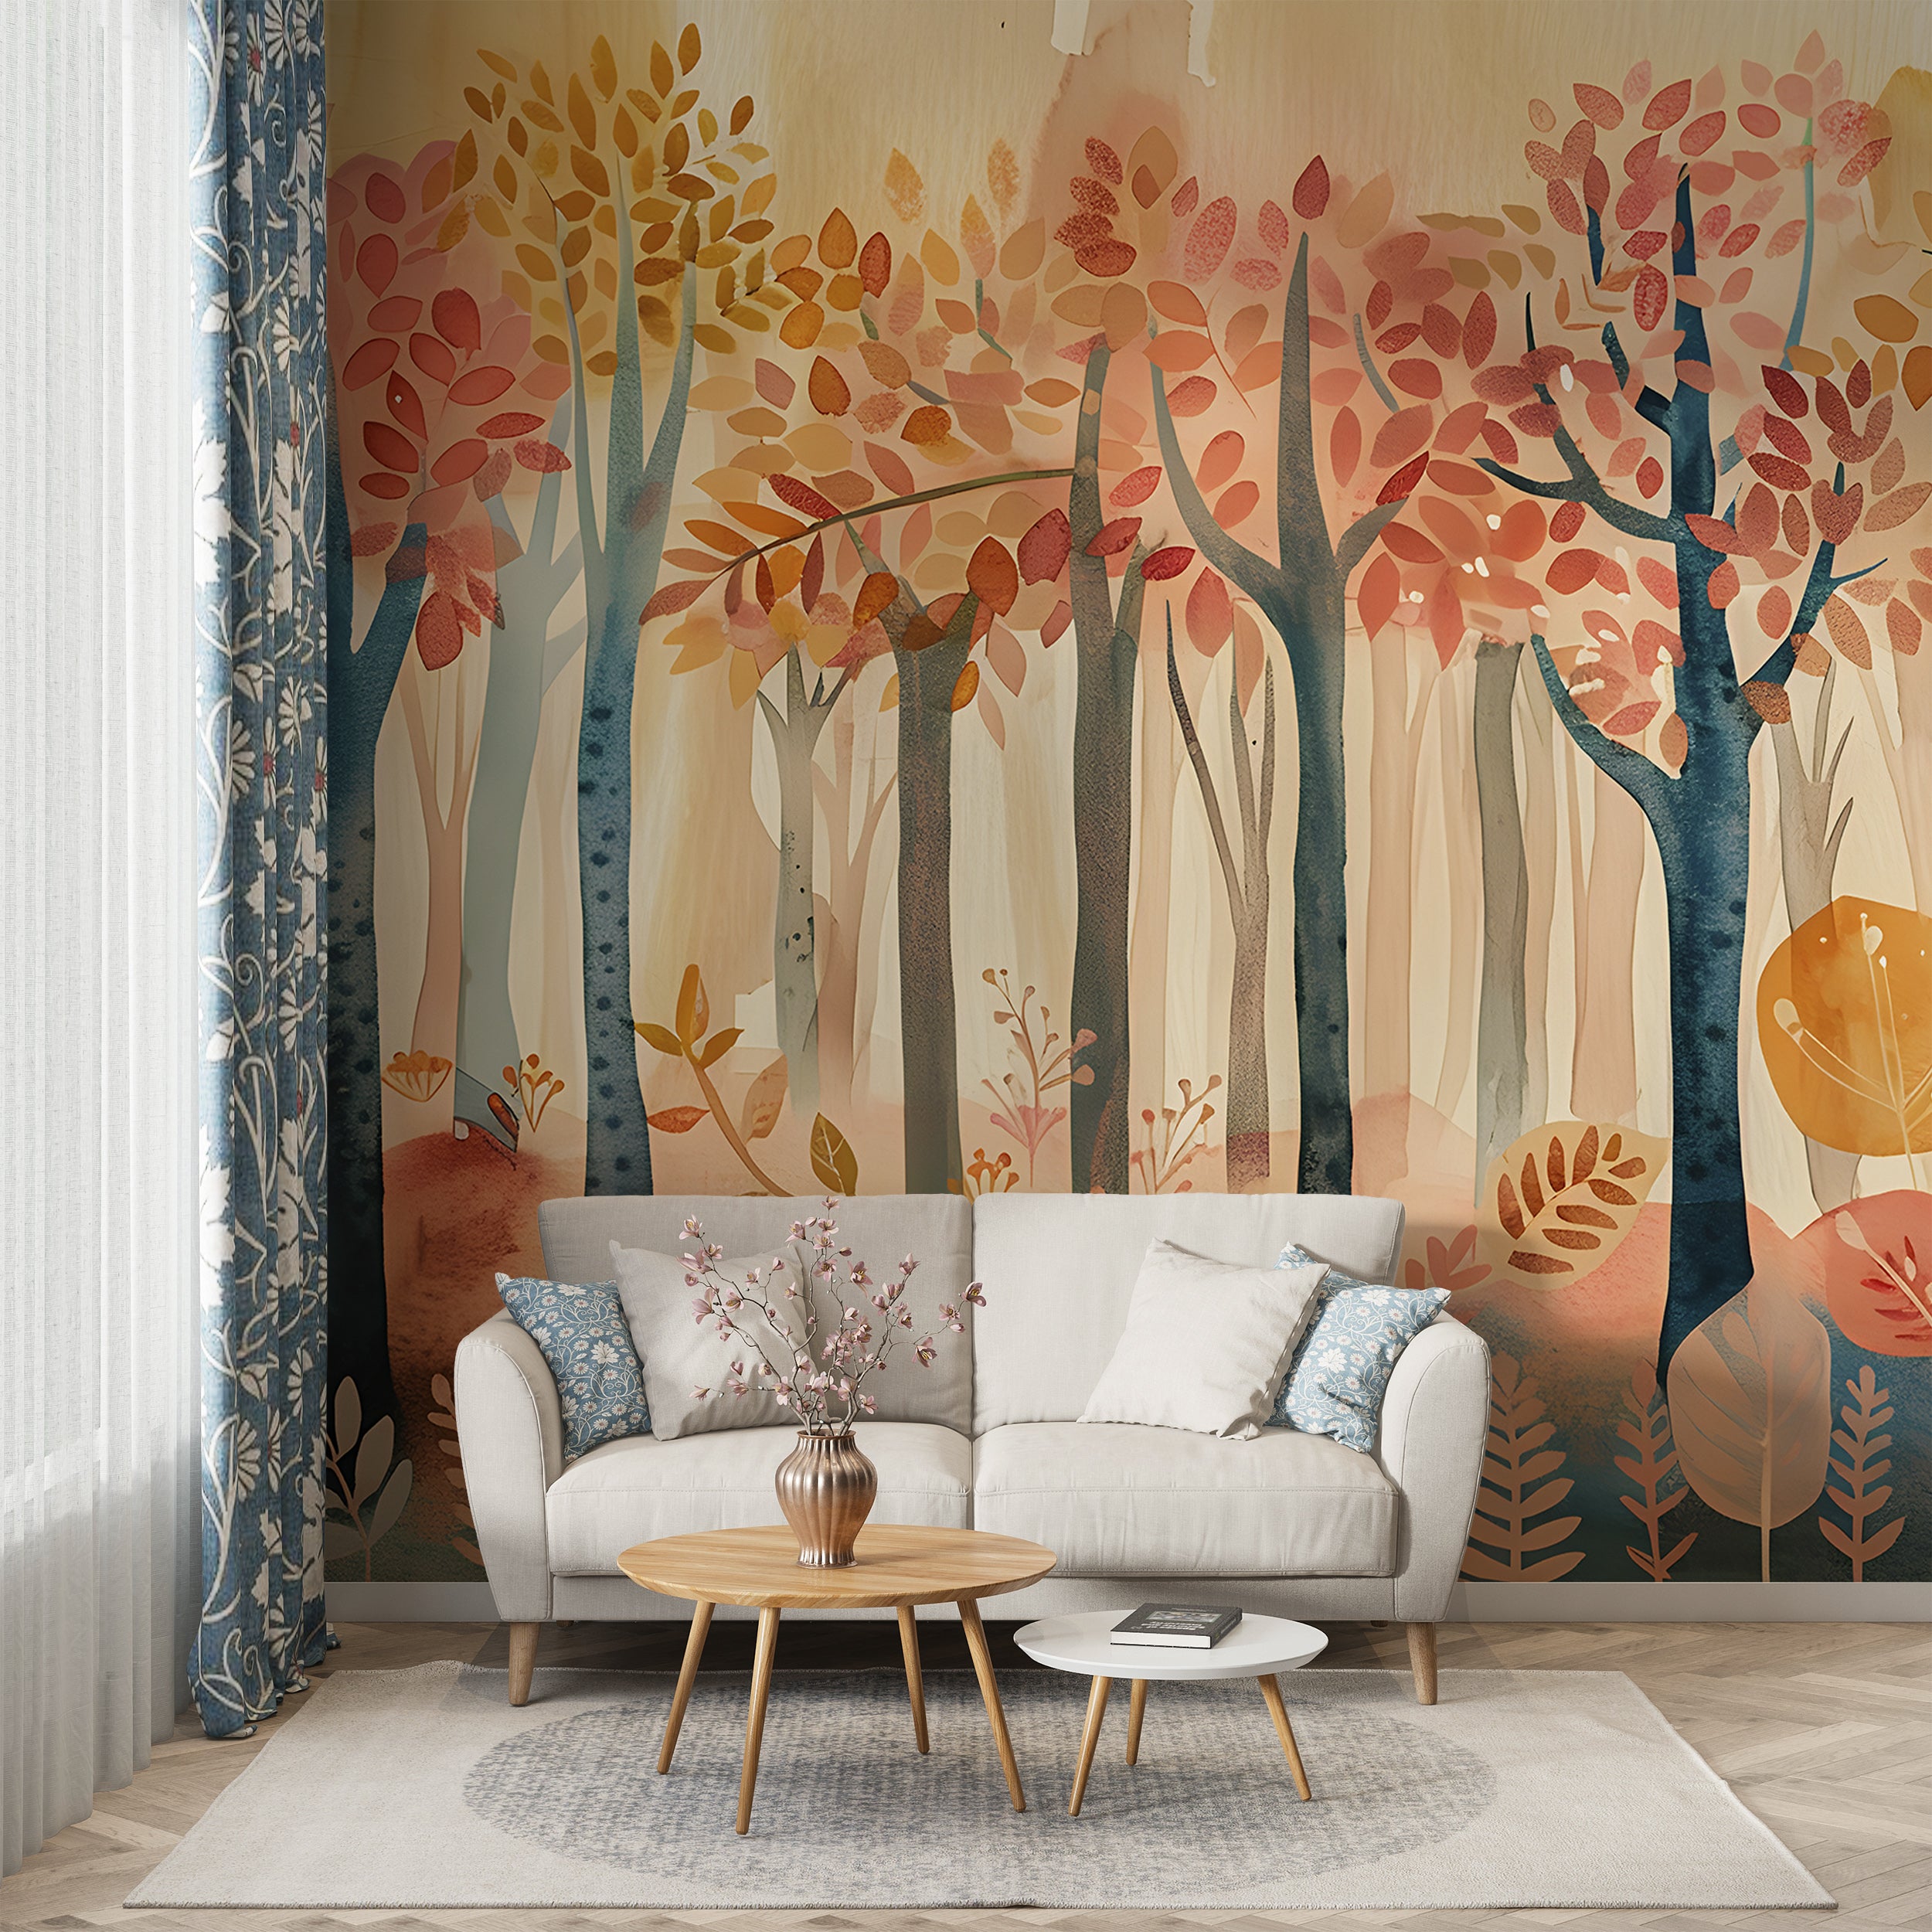 Autumn Forest Mural - Watercolor Nature Wallpaper - Colorful Forest Wall Decal - Peel and Stick Orange Trees Mural - Nursery PVC free